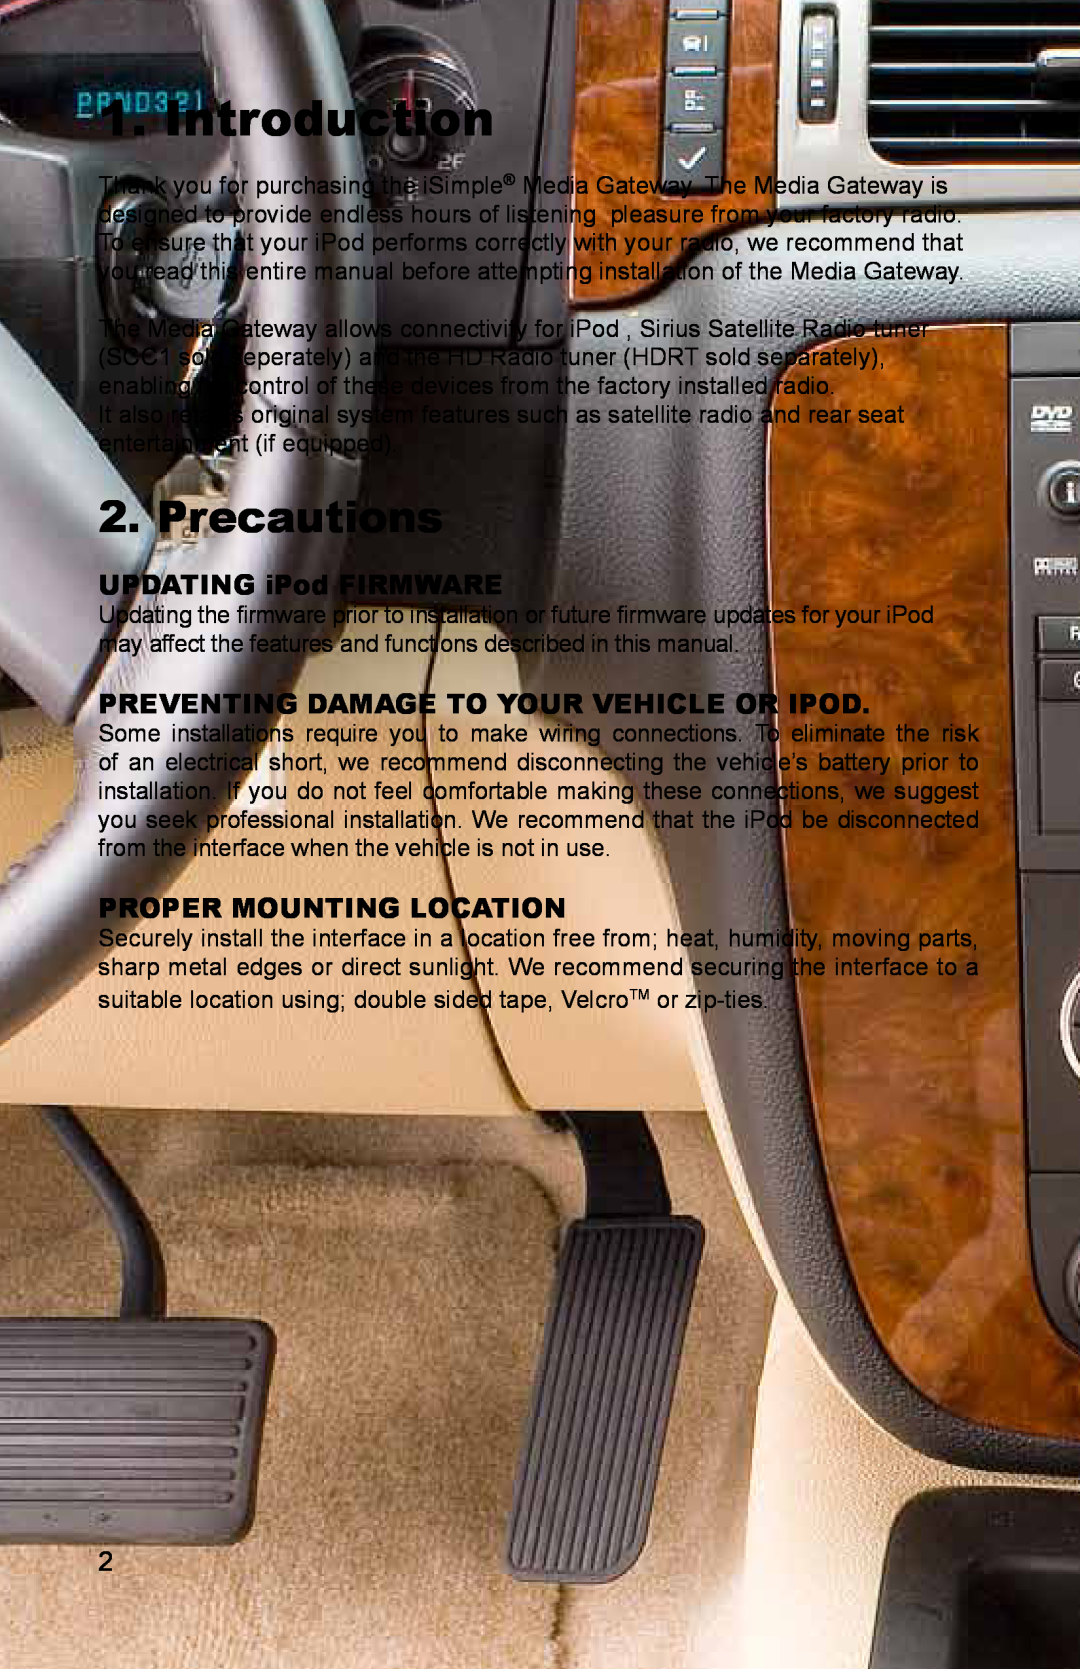 iSimple PGHGM1, PXAMG Introduction, Precautions, UPDATING iPod FIRMWARE, PREVENTING DAMAGE TO YOUR VEHICLE OR iPod 